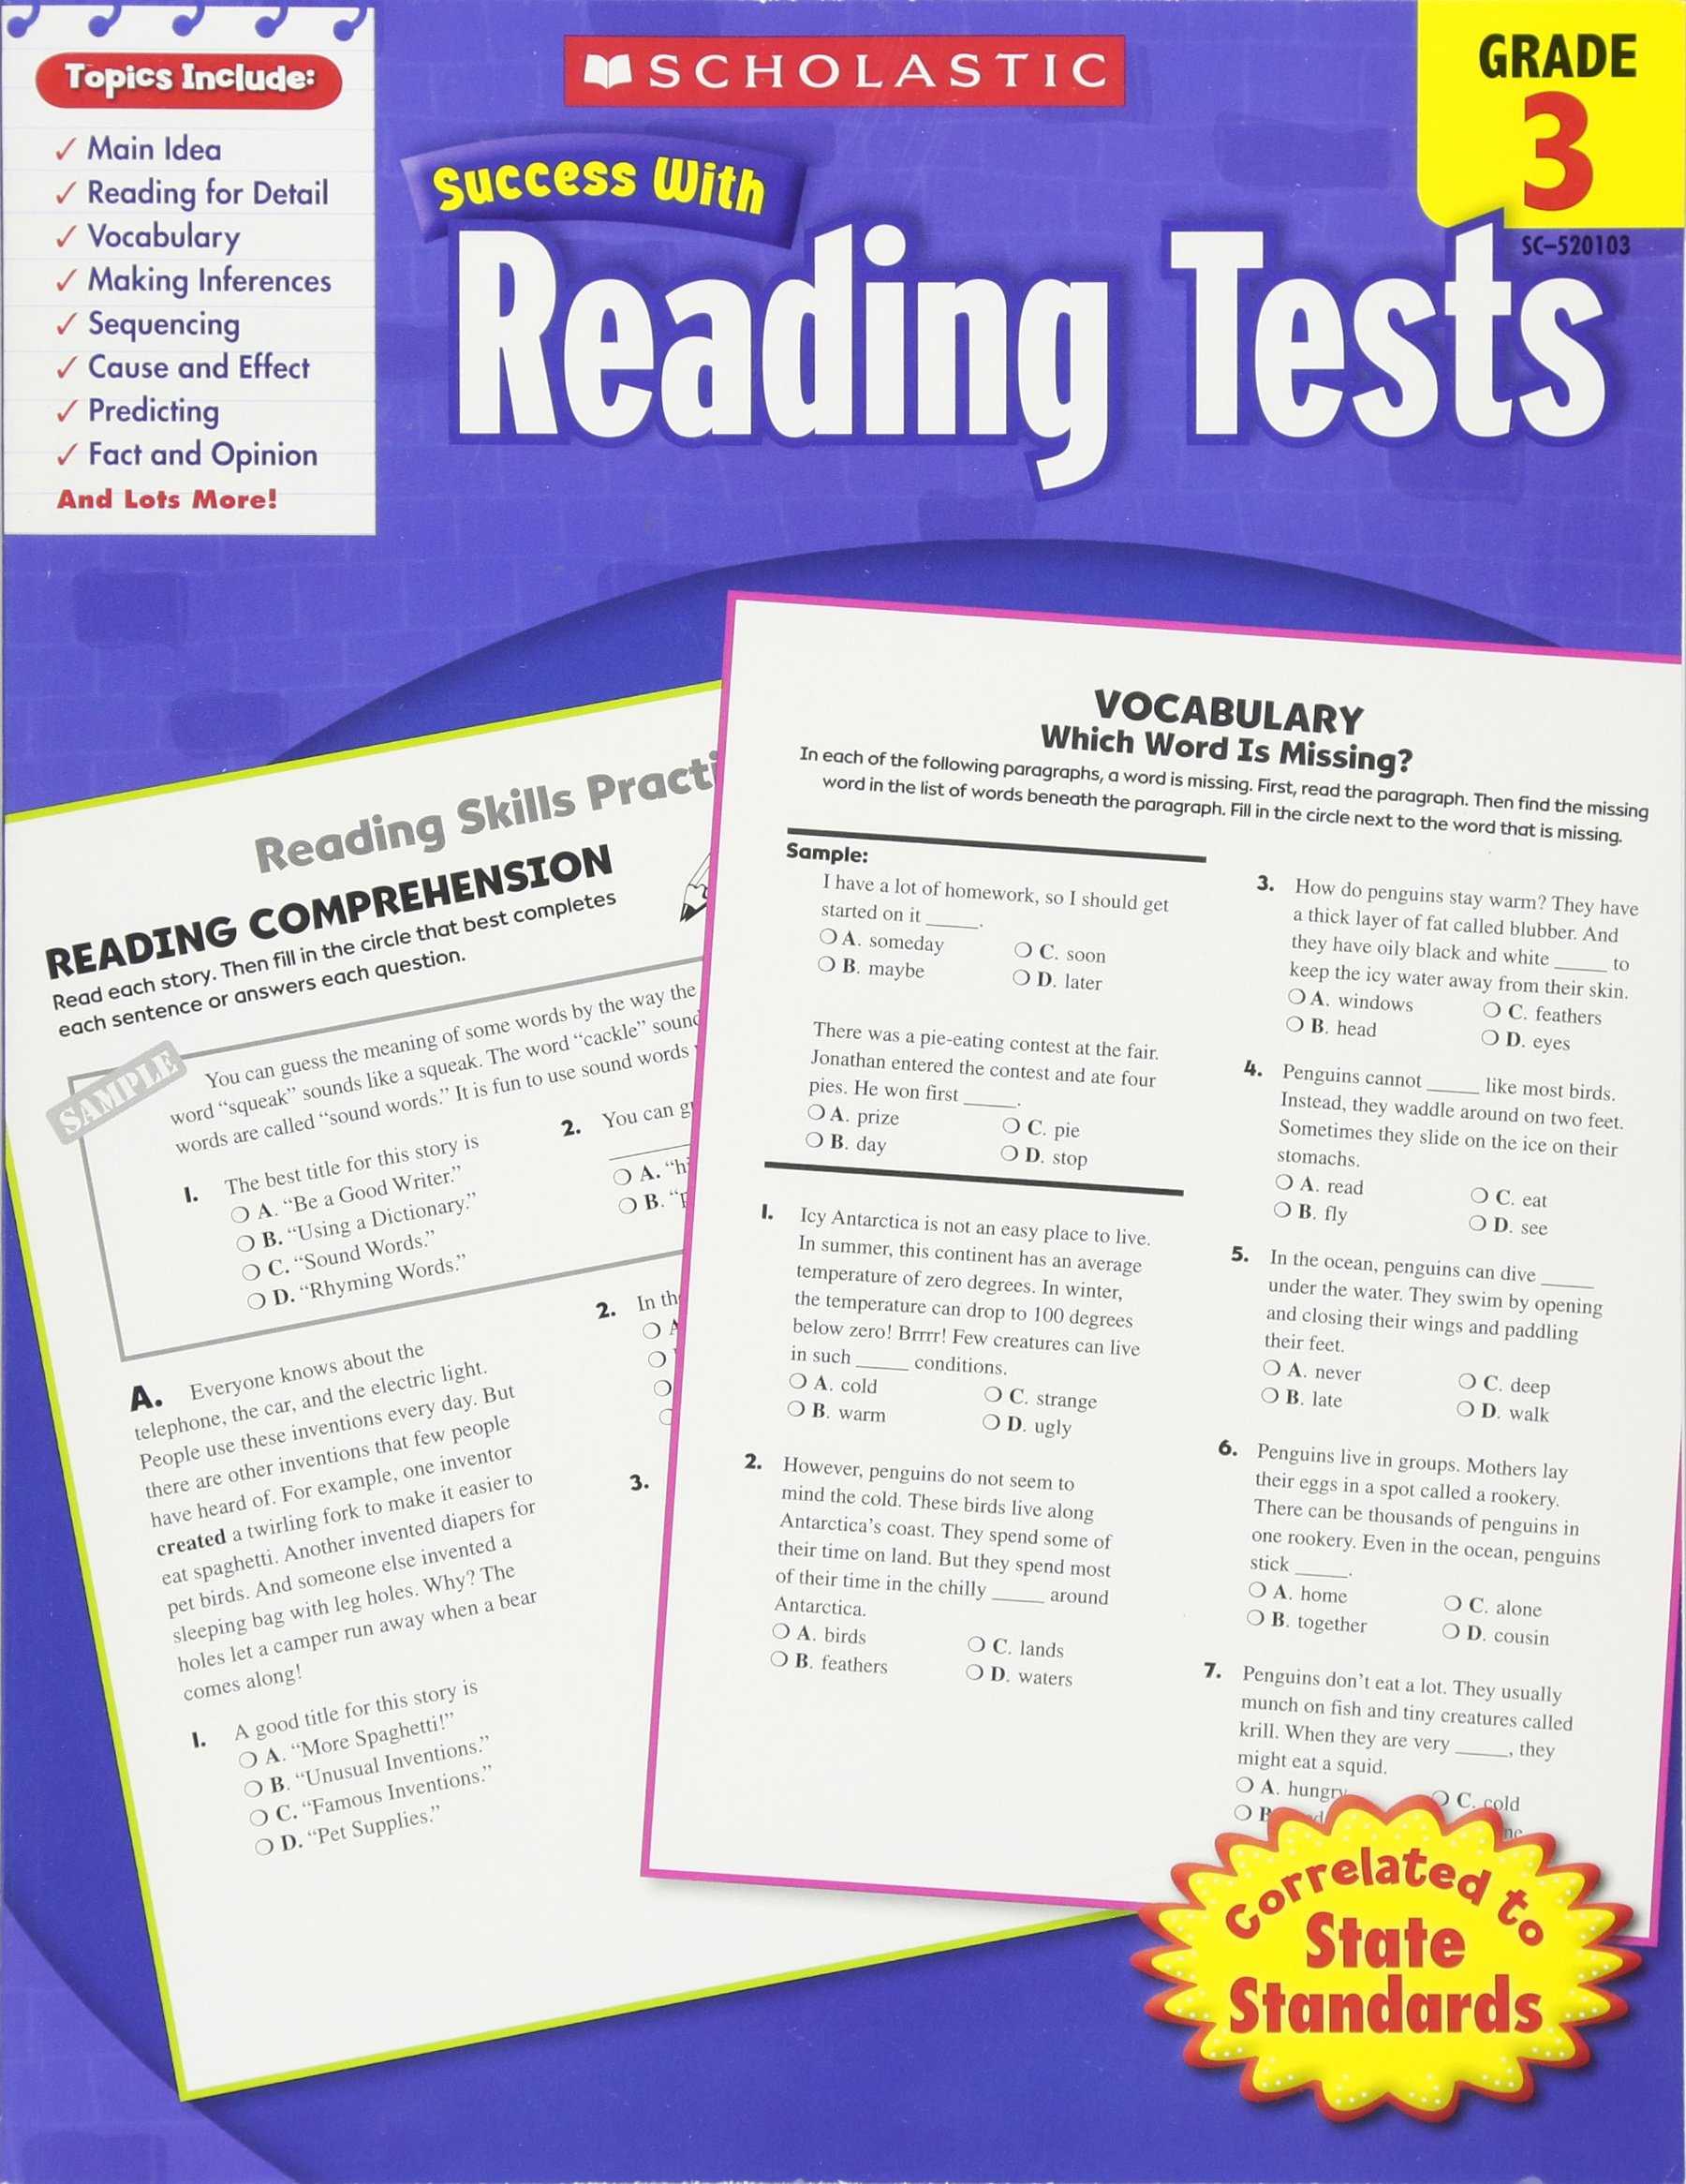 Culinary Essentials Worksheet Answers as Well as Amazon Scholastic Success with Reading Tests Grade 3